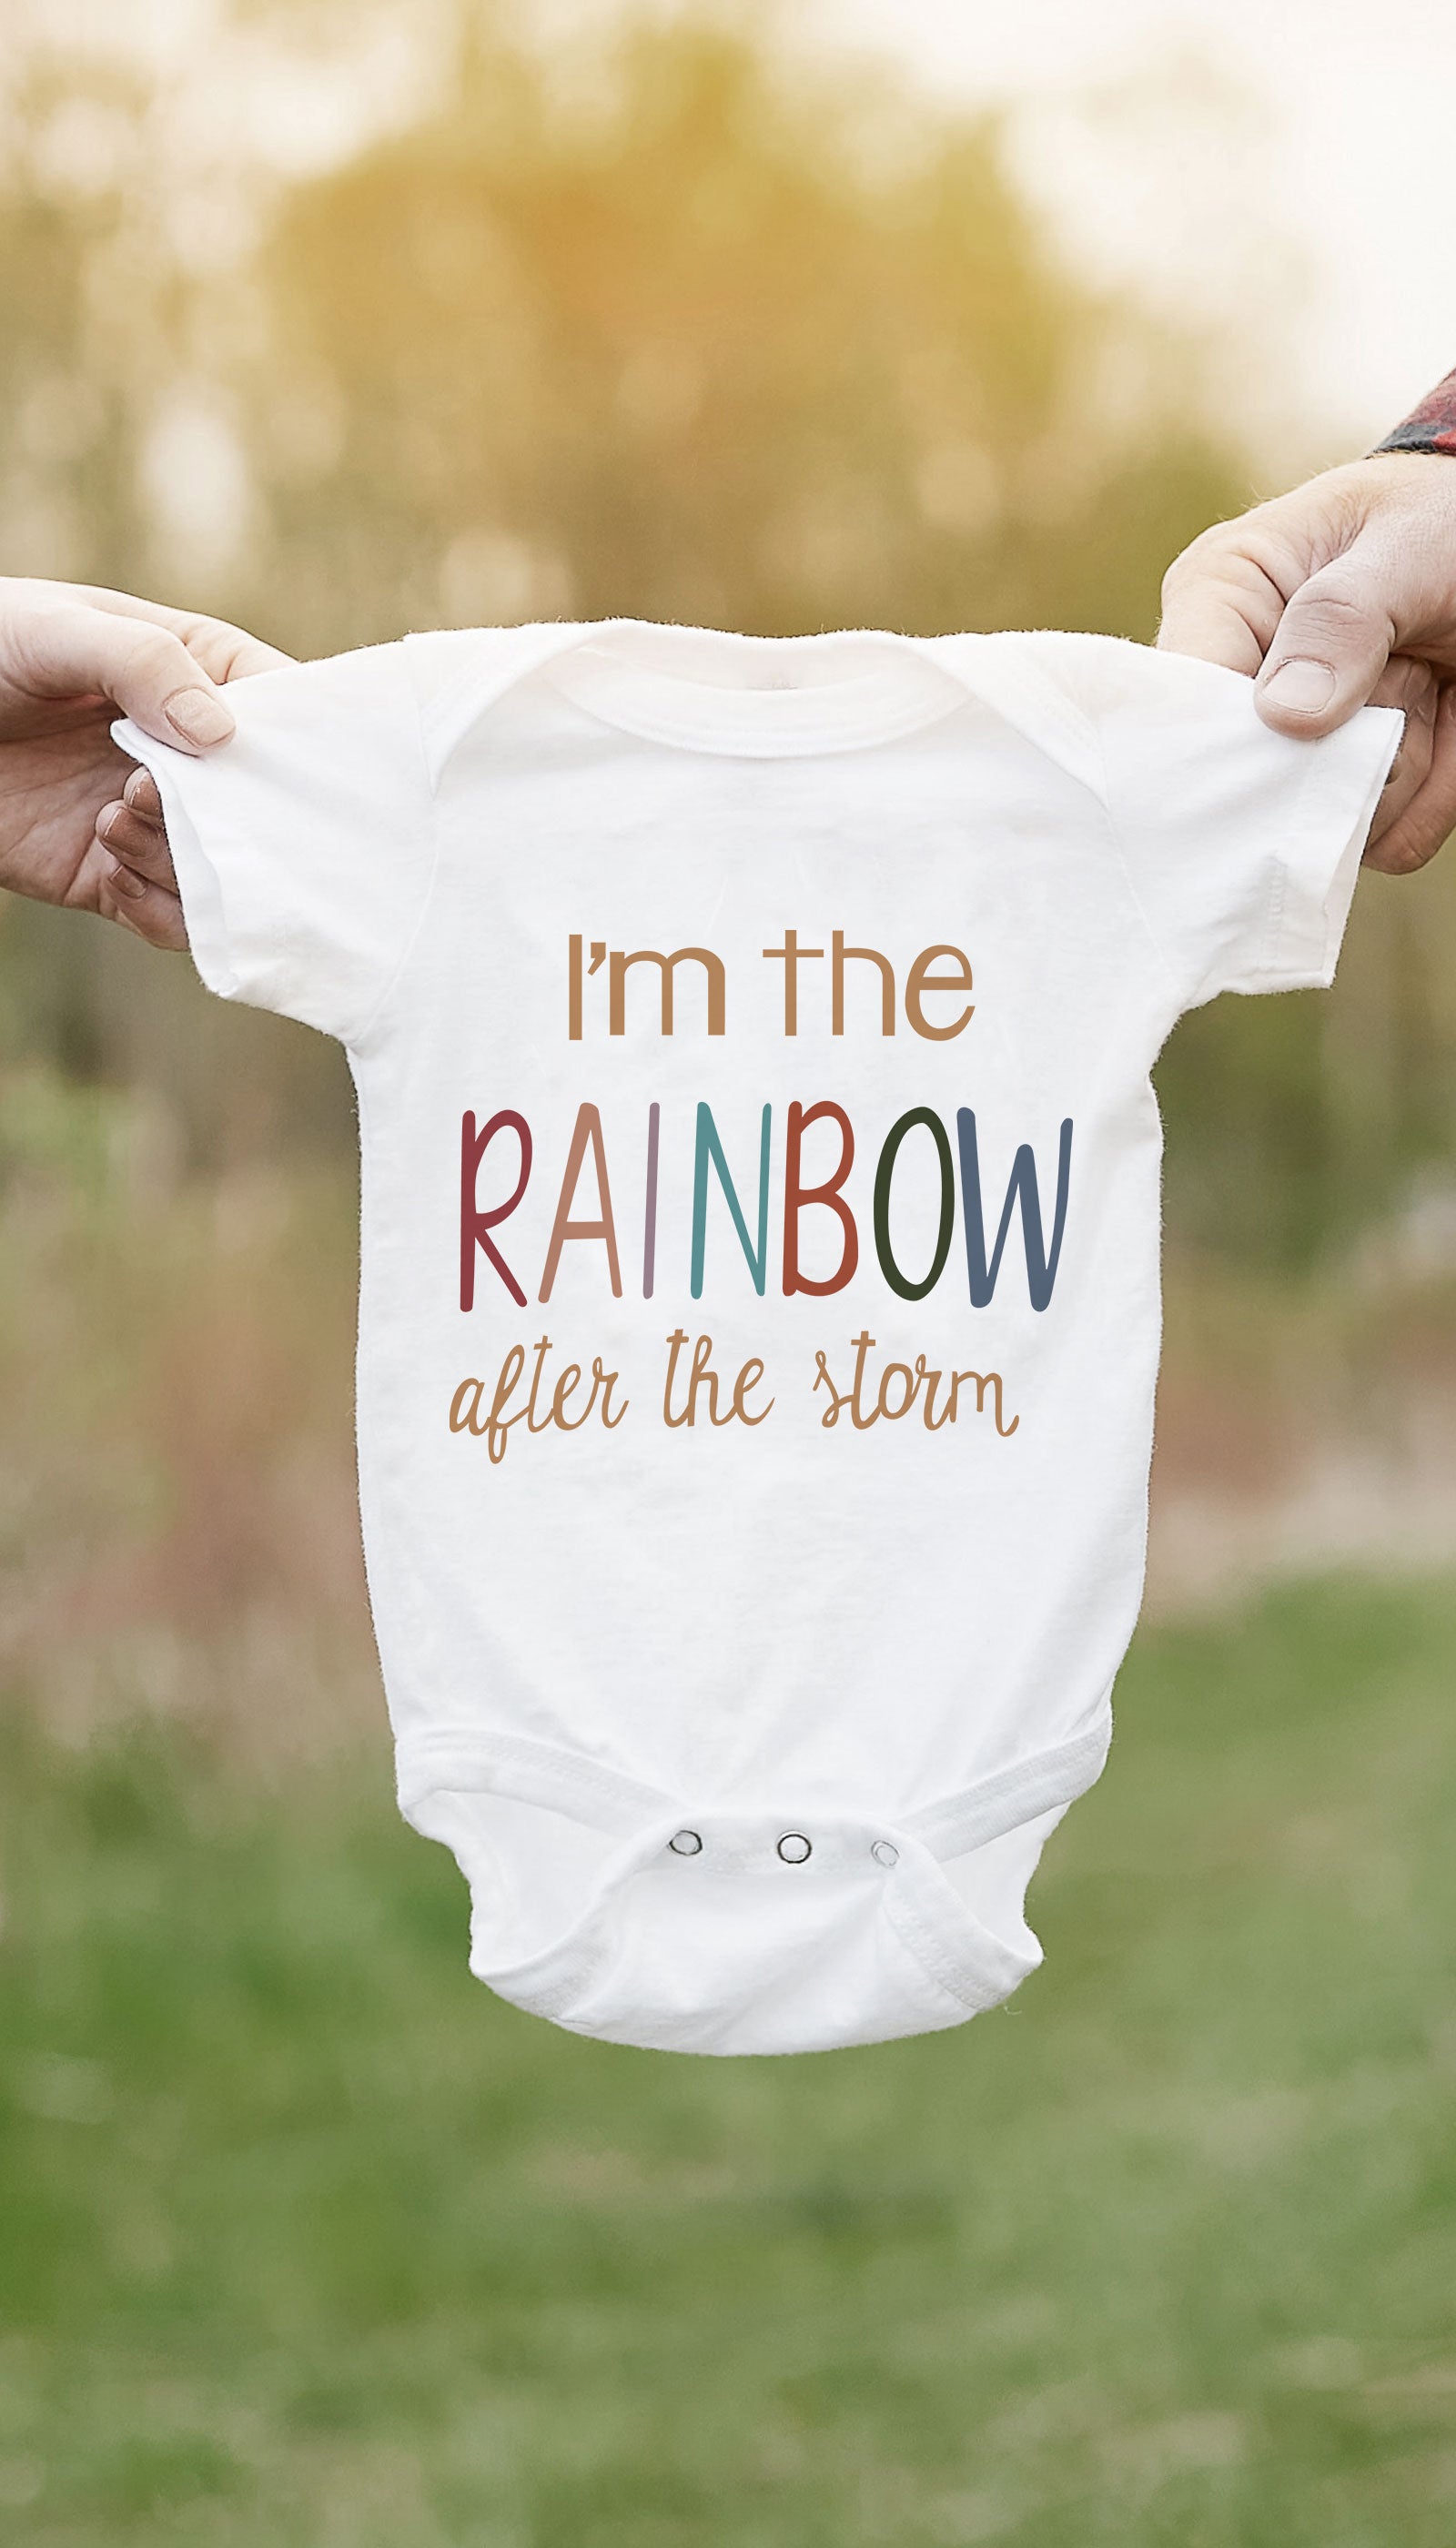 I'm The Rainbow After The Storm Funny & Clever Baby Infant Onesie Gift | Sarcastic ME